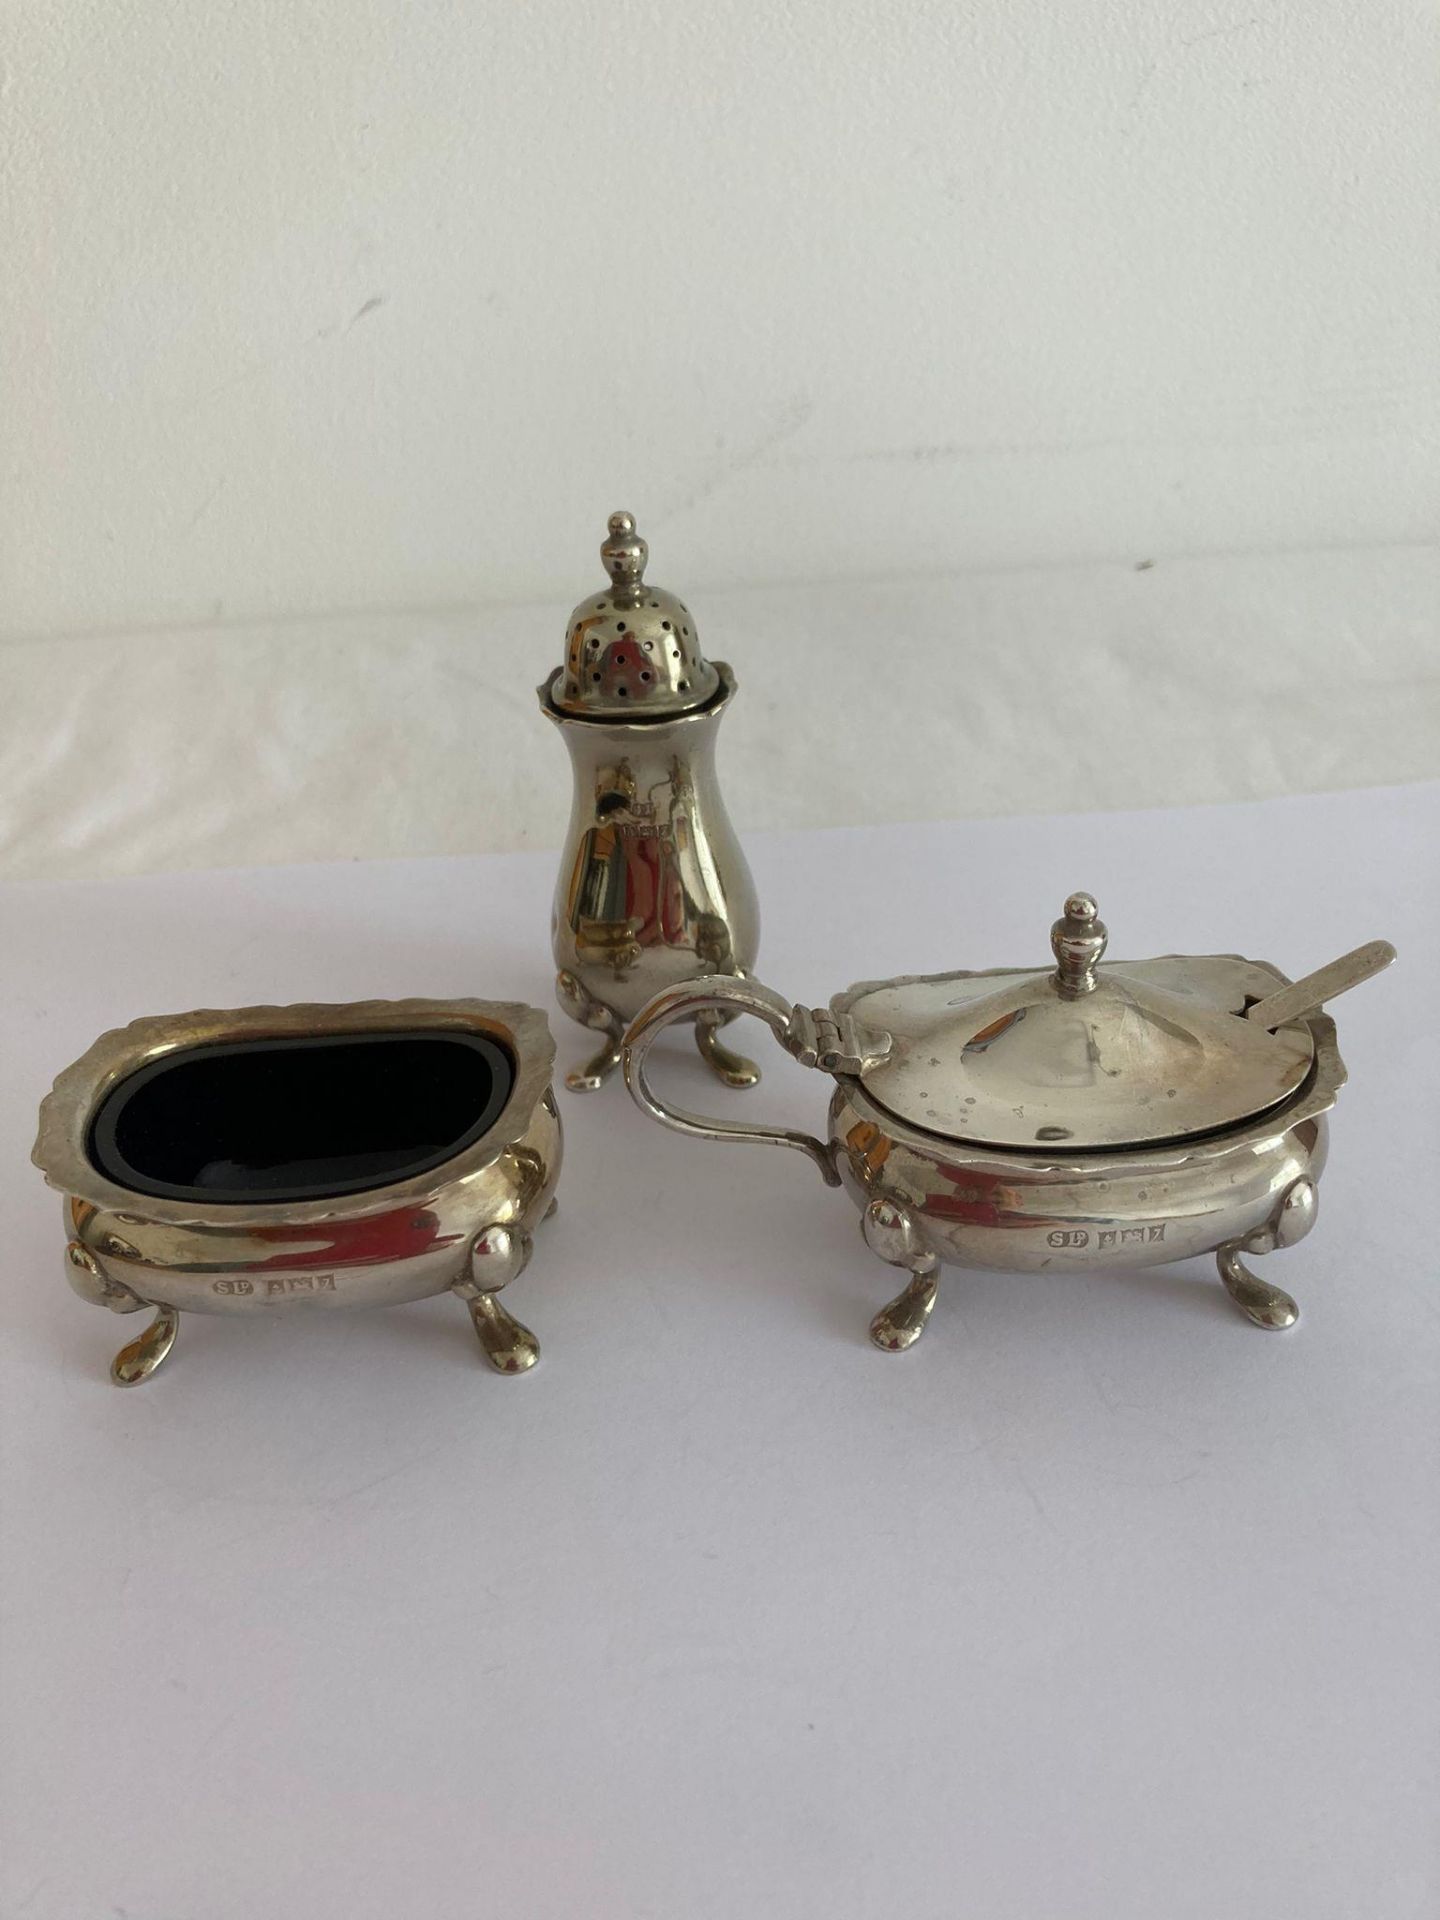 Vintage SILVER CONDIMENT SET, Consisting salt, pepper and mustard pot, fully hallmarked. Beautiful